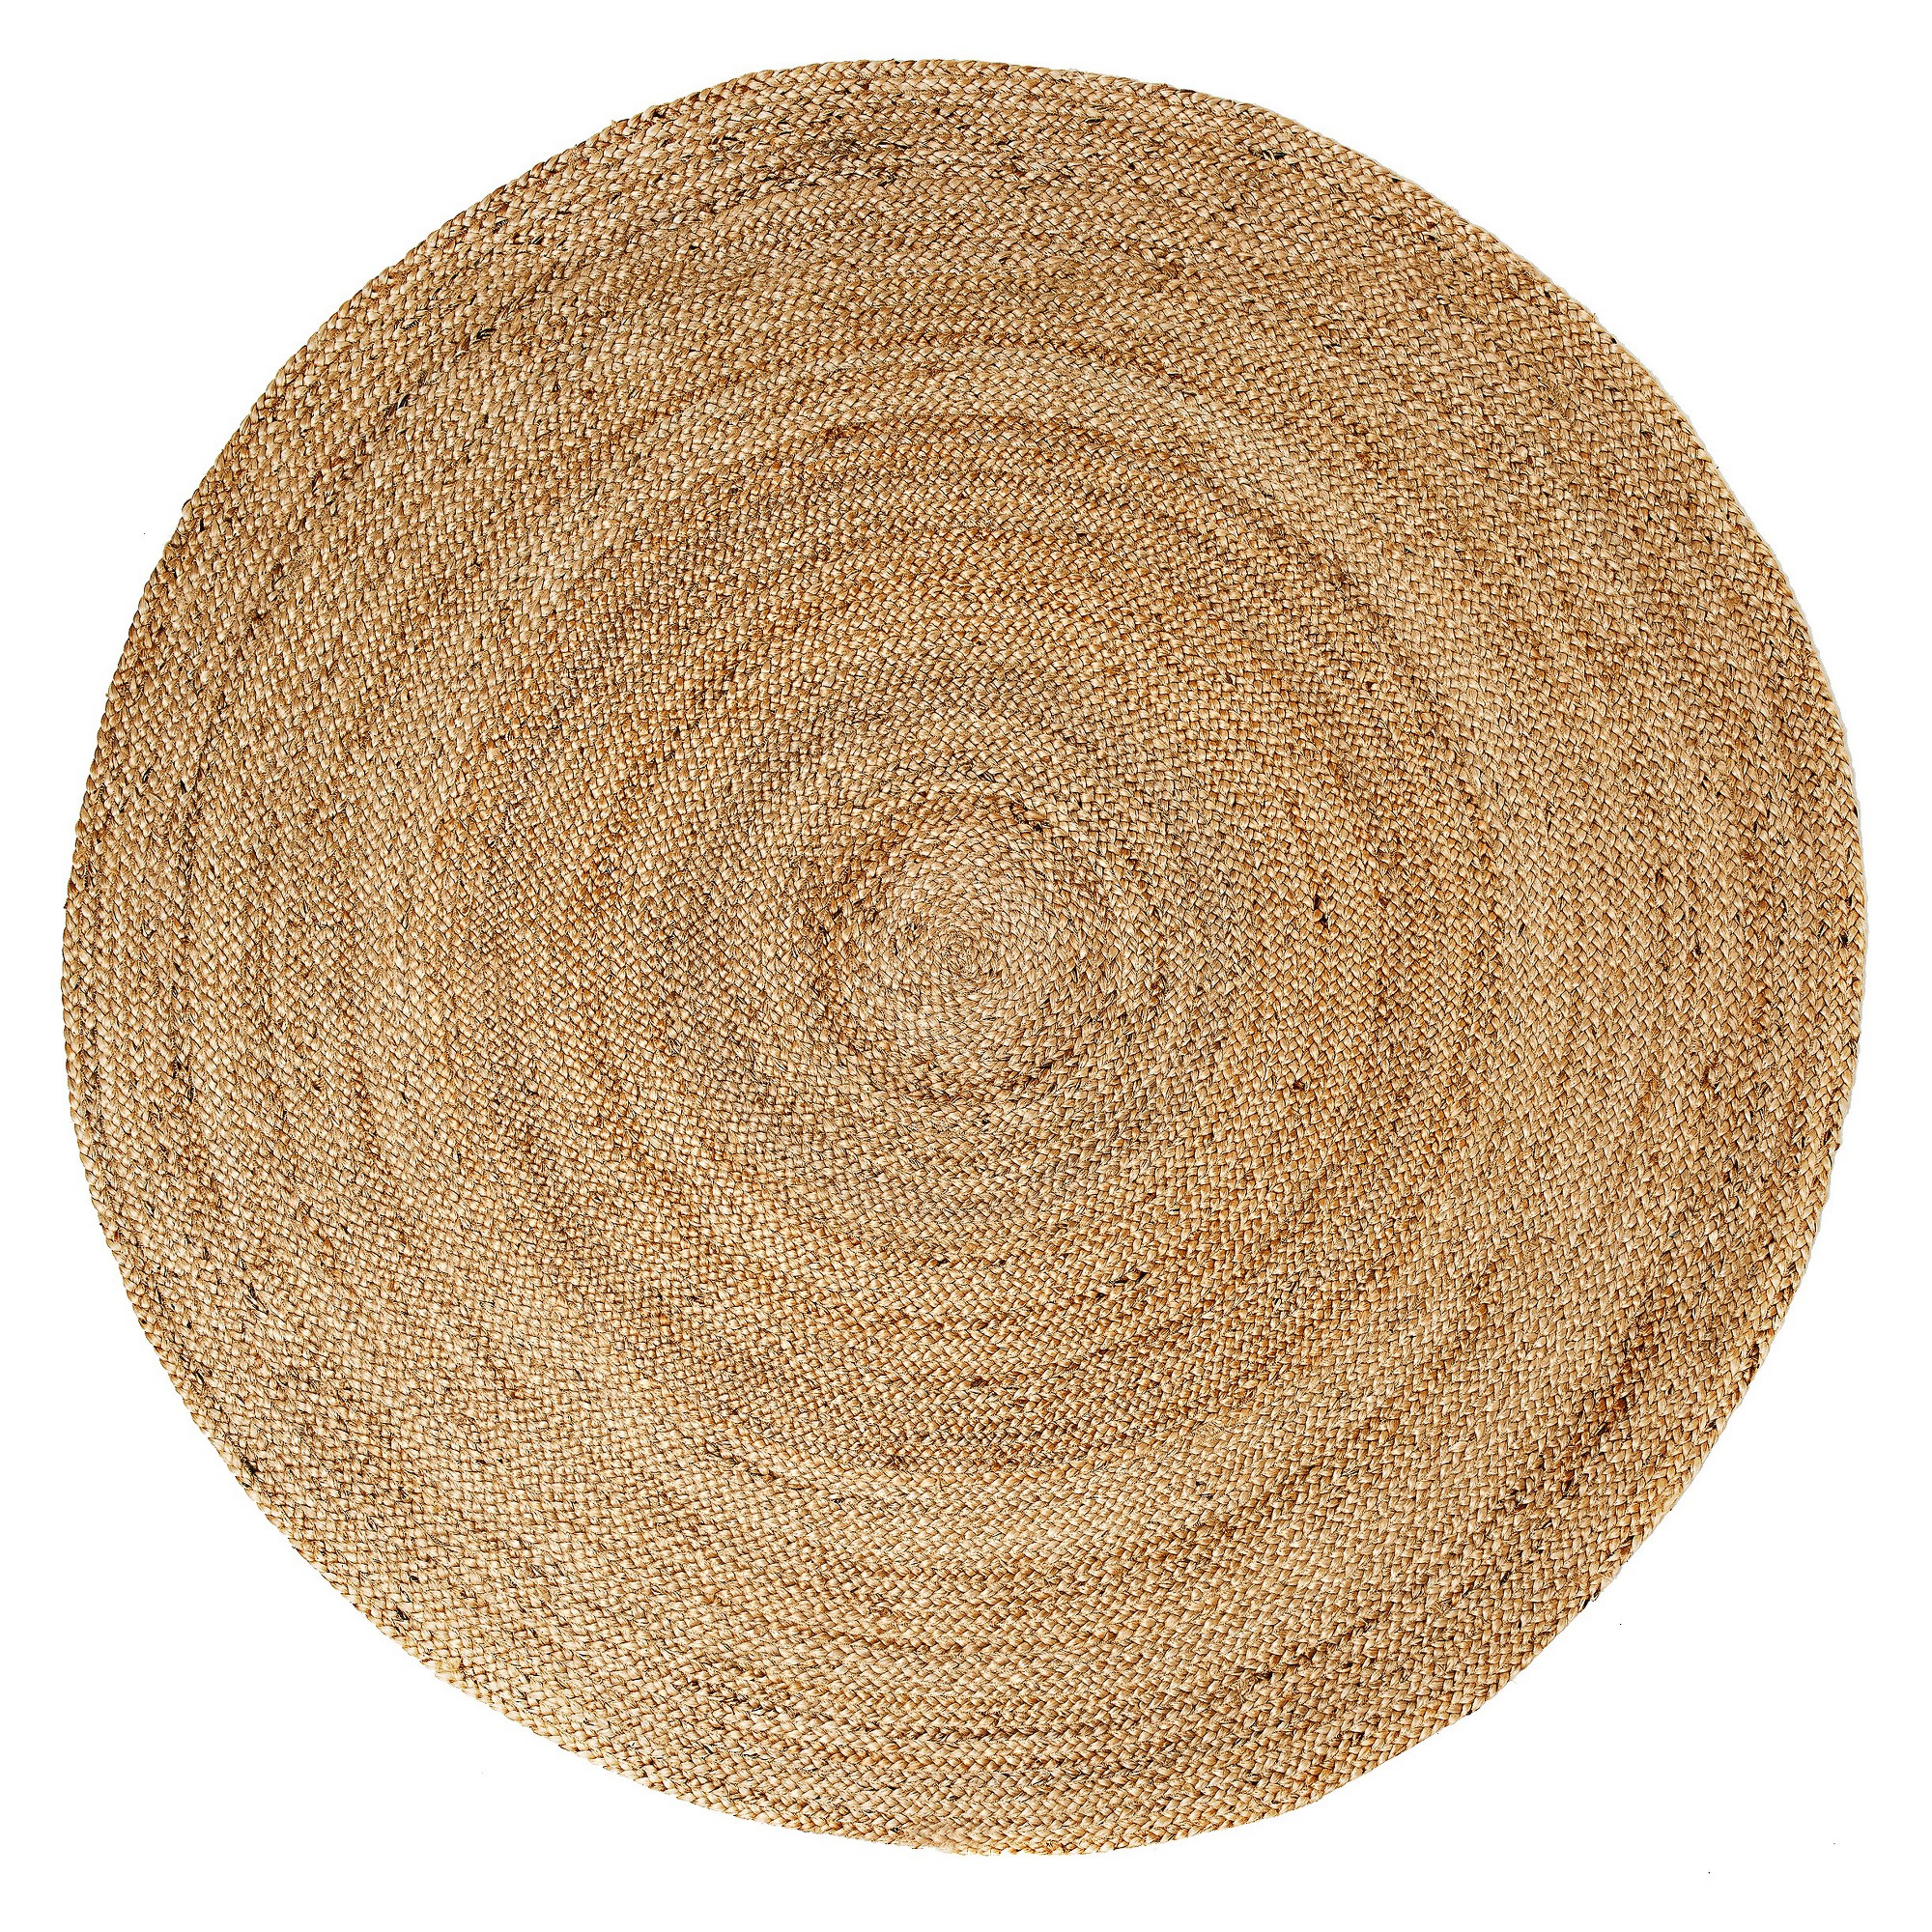 6' Solid Area Rug Natural - Anji Mountain, Size: 6' ROUND